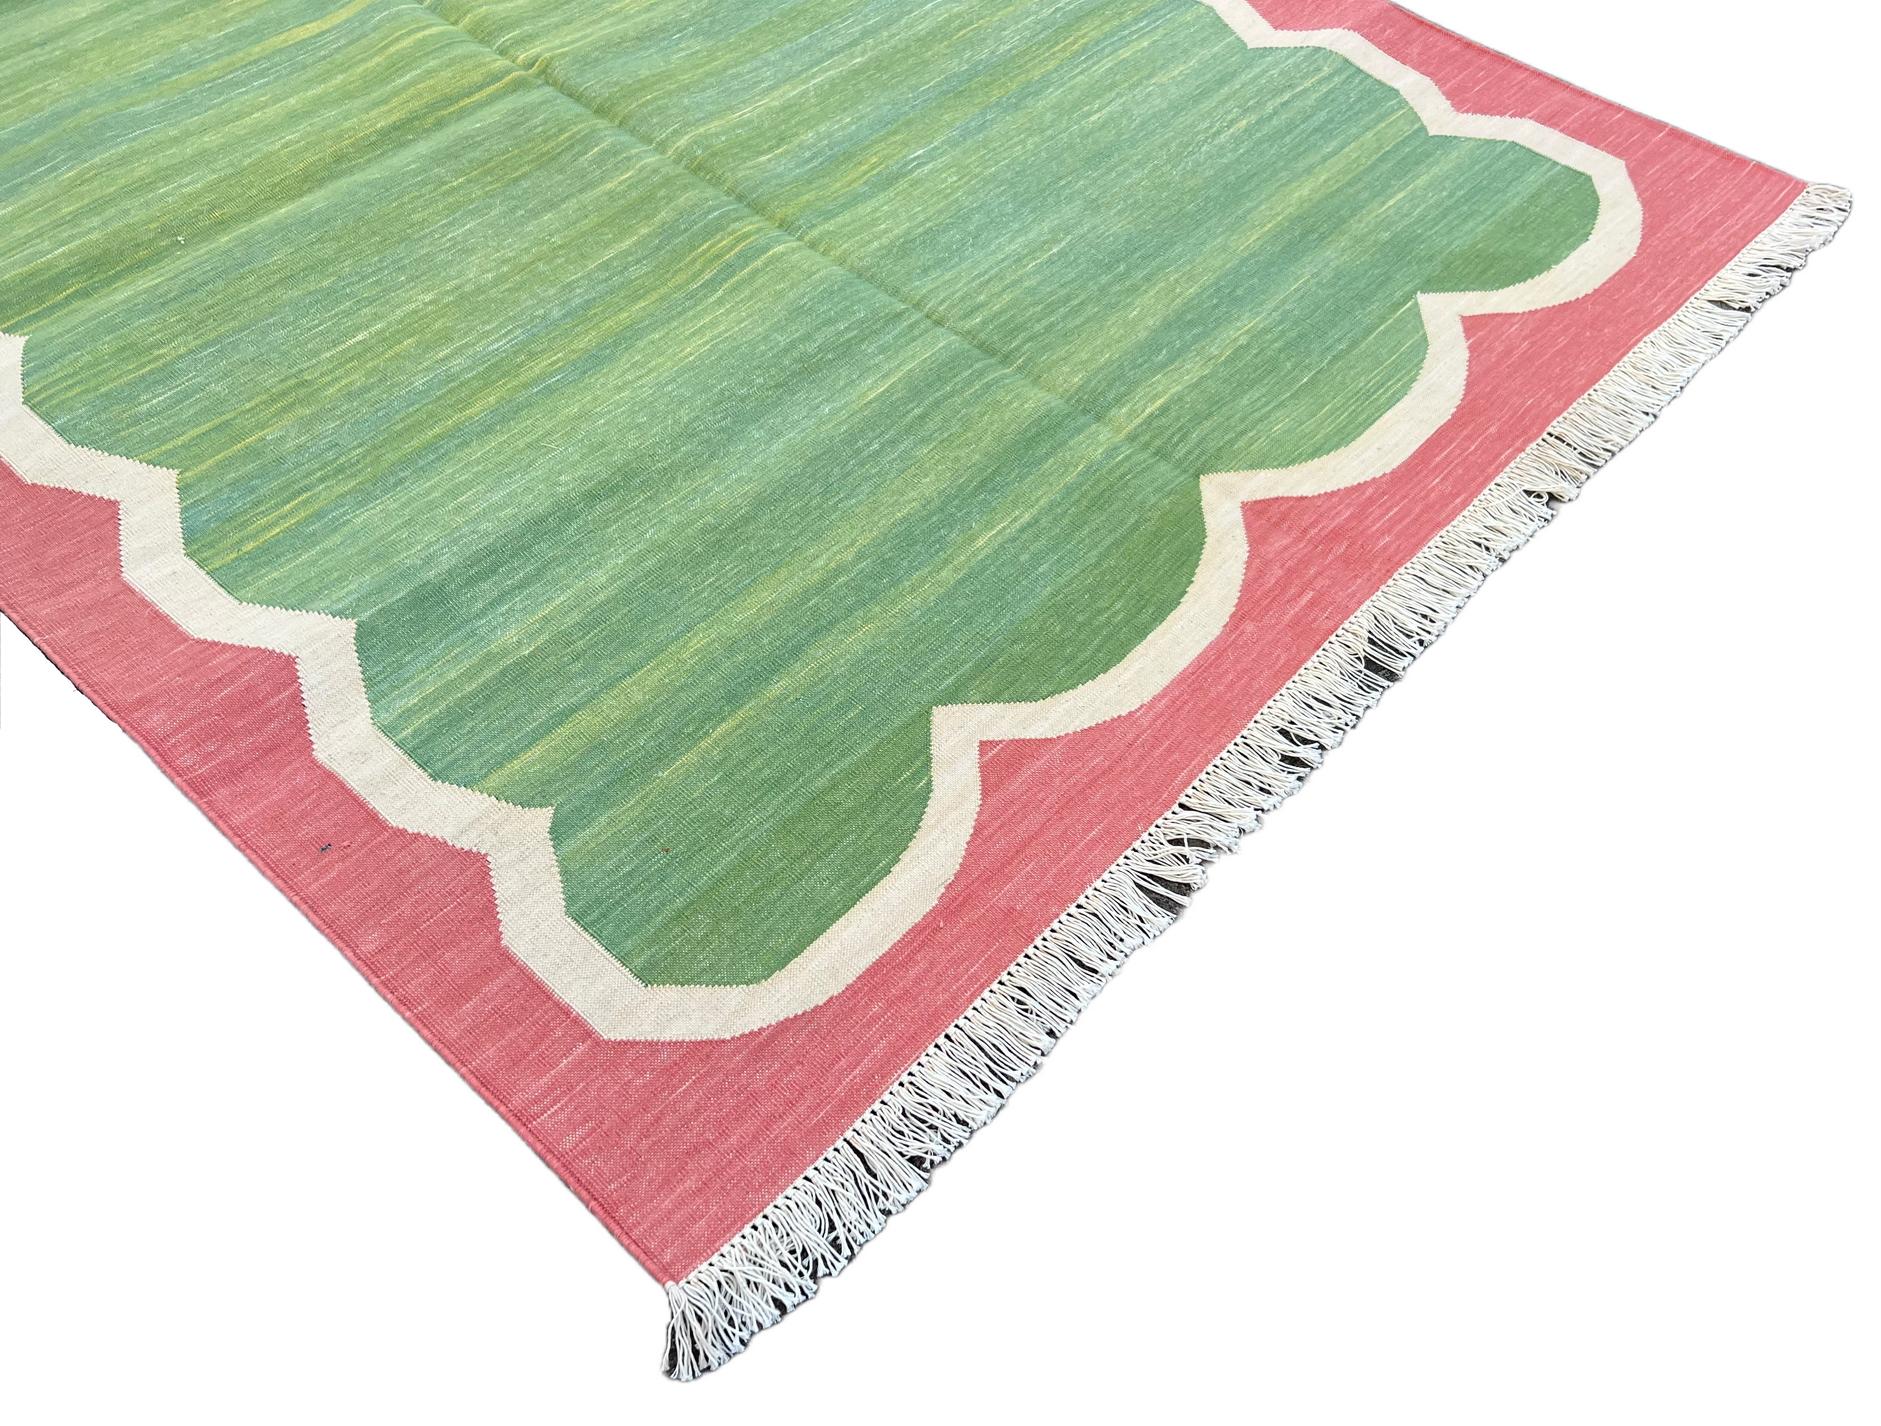 Hand-Woven Handmade Cotton Area Flat Weave Rug, 4x6 Green And Coral Scallop Indian Dhurrie For Sale